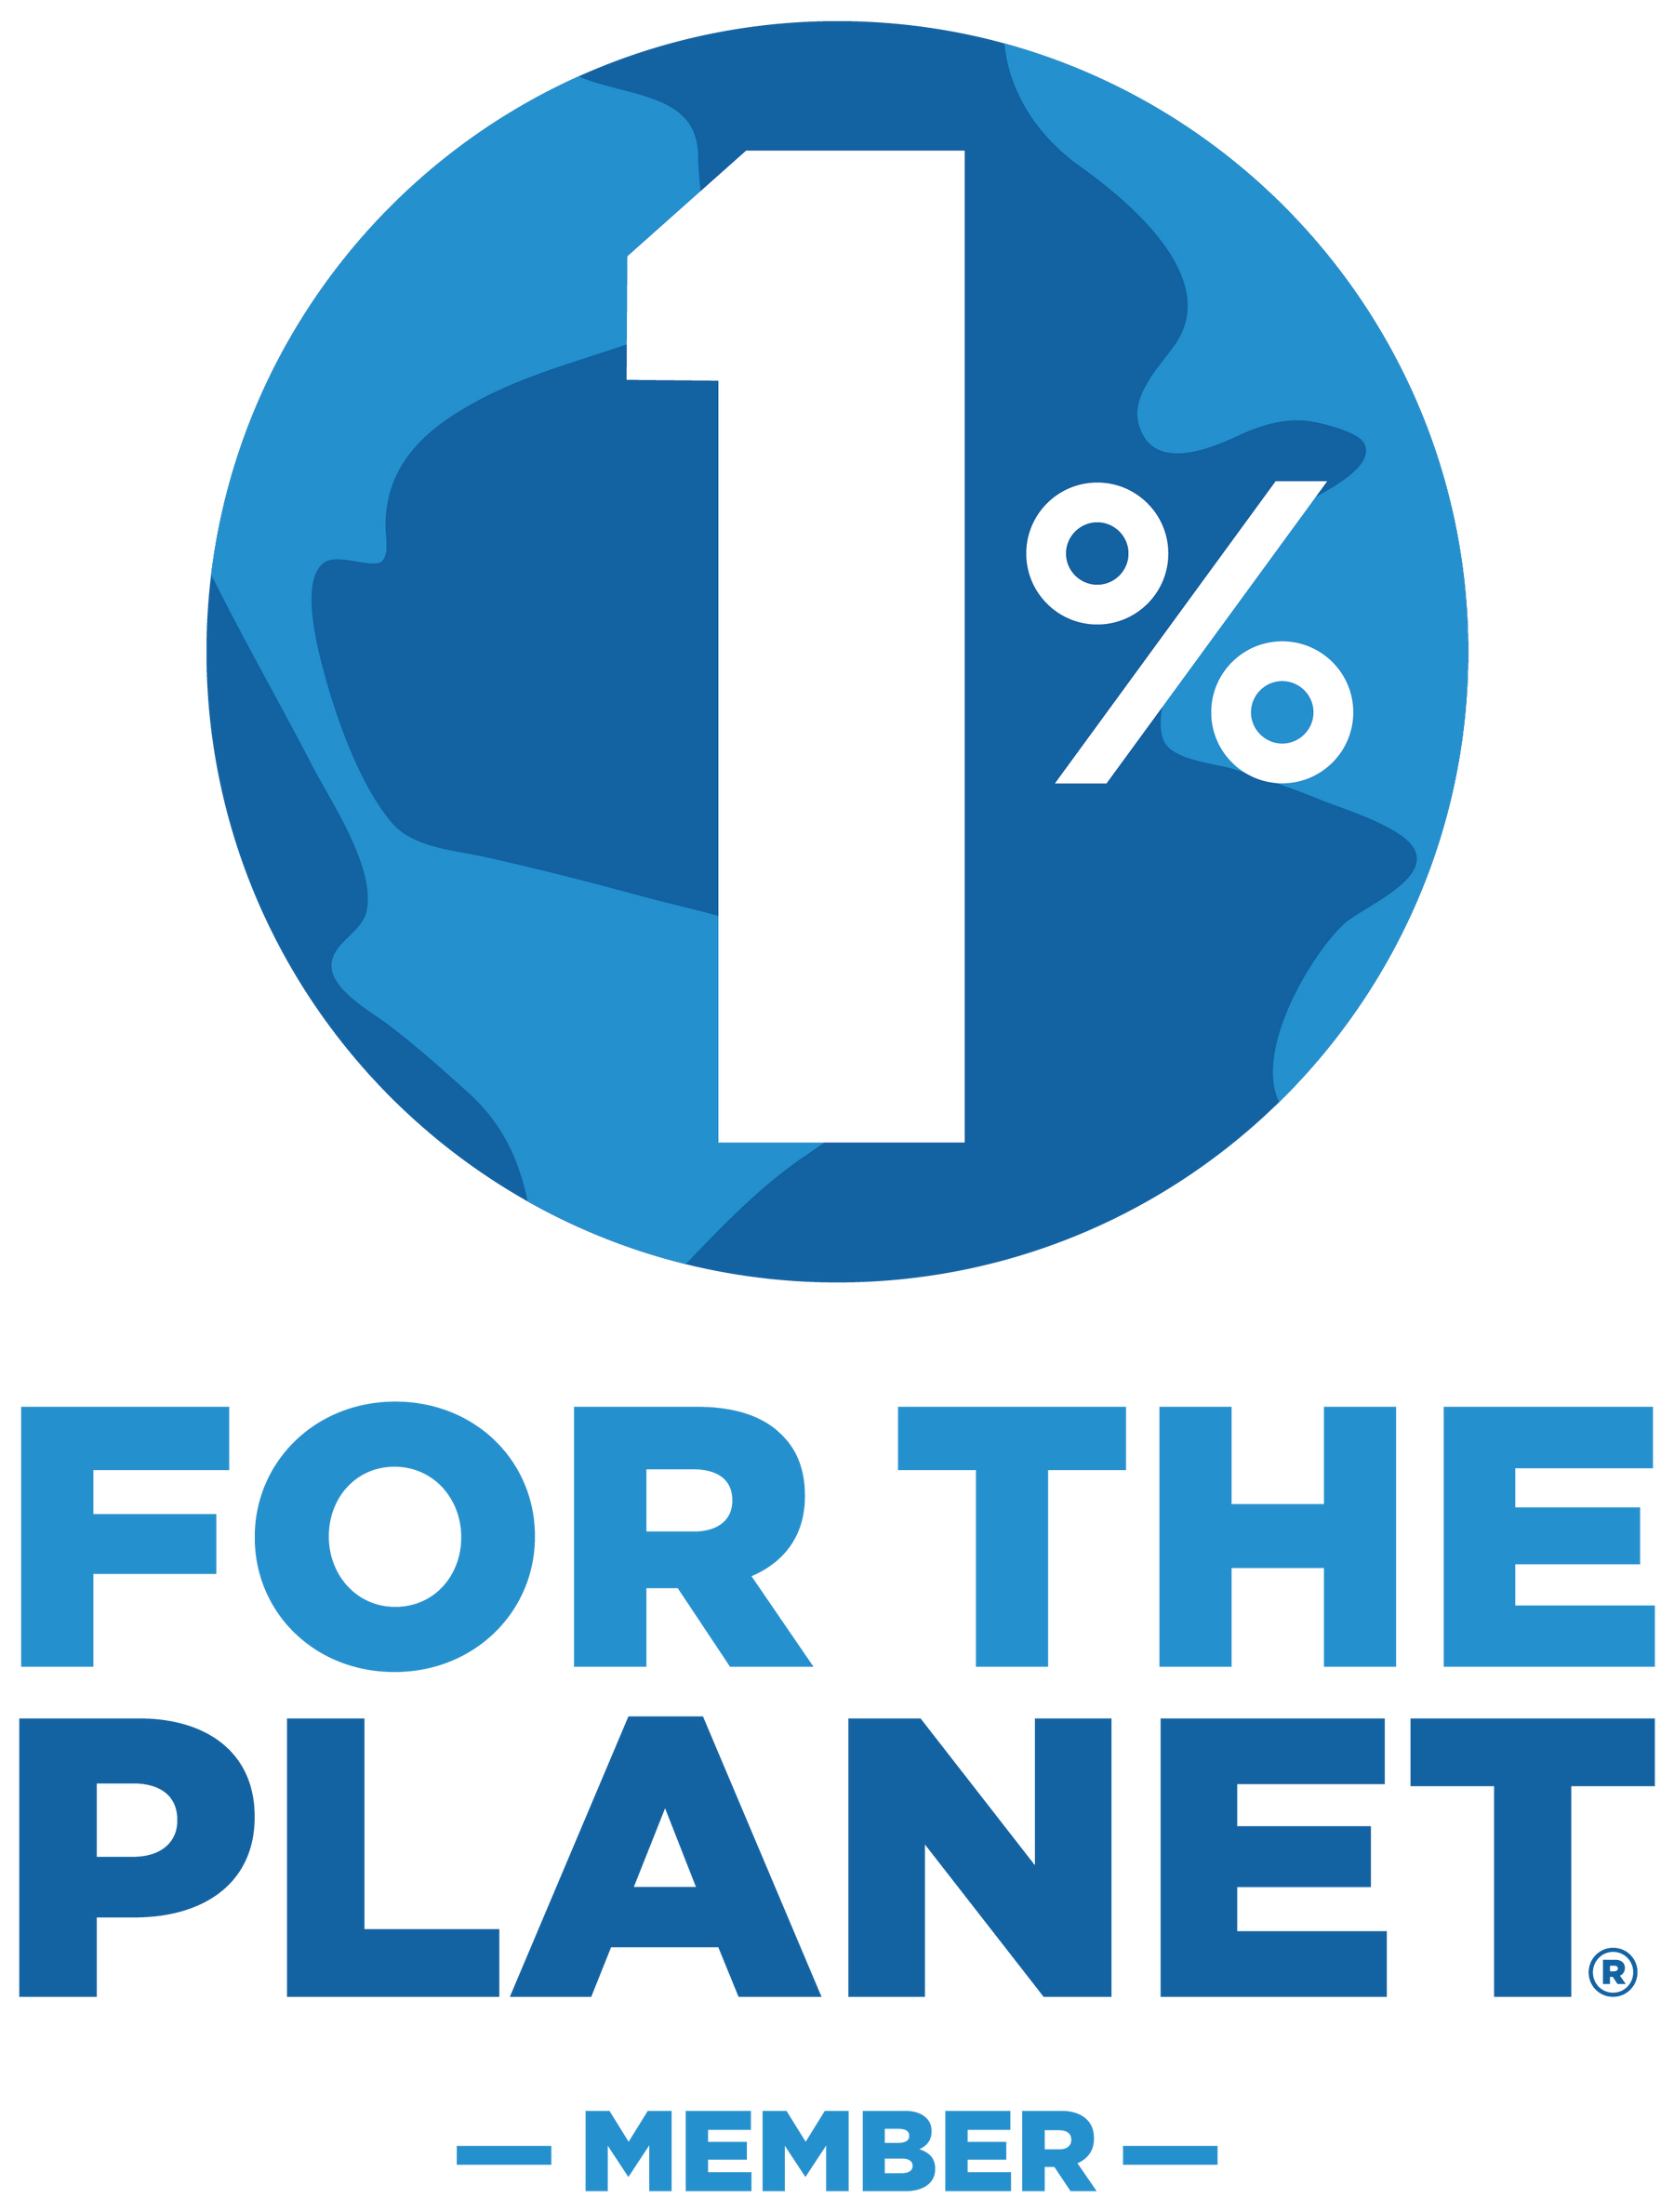 The Heritage Bee Co is a proud member of the 1% For The Planet organization that gives back to the planet.